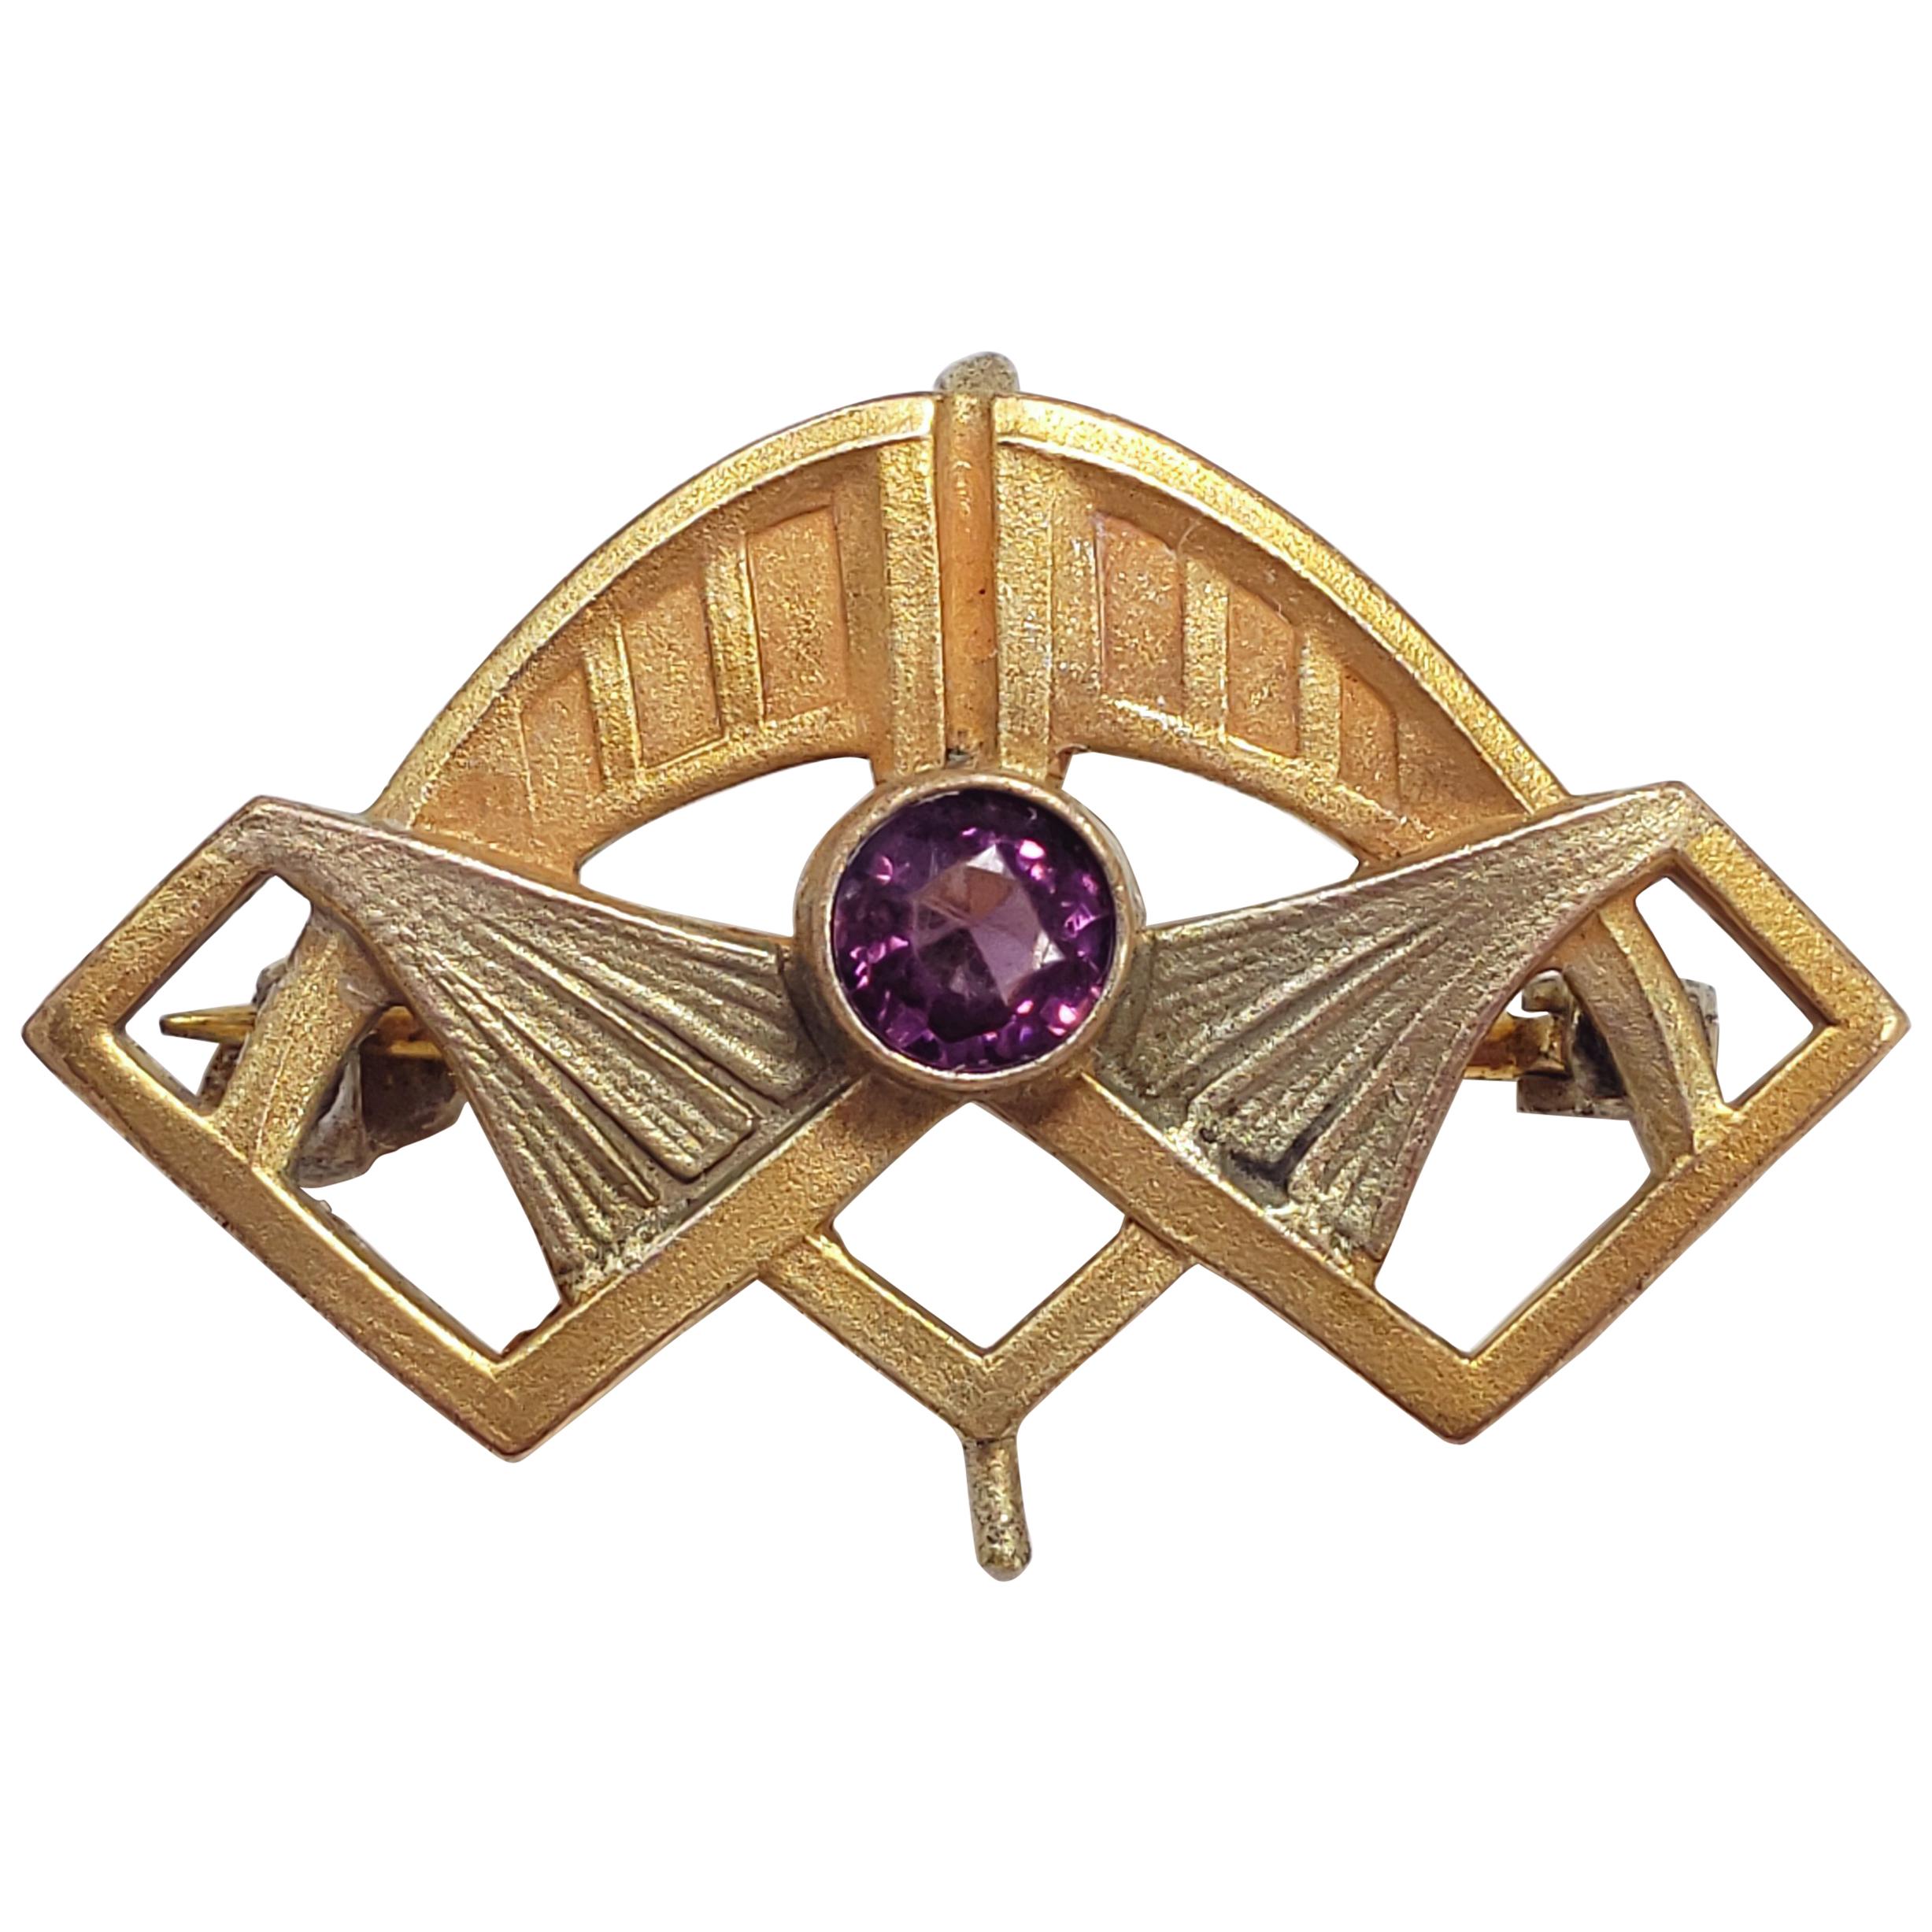 Art Deco Geometrical Pendant/Brooch/Pin with Amethyst Crystal in Brass, 1910